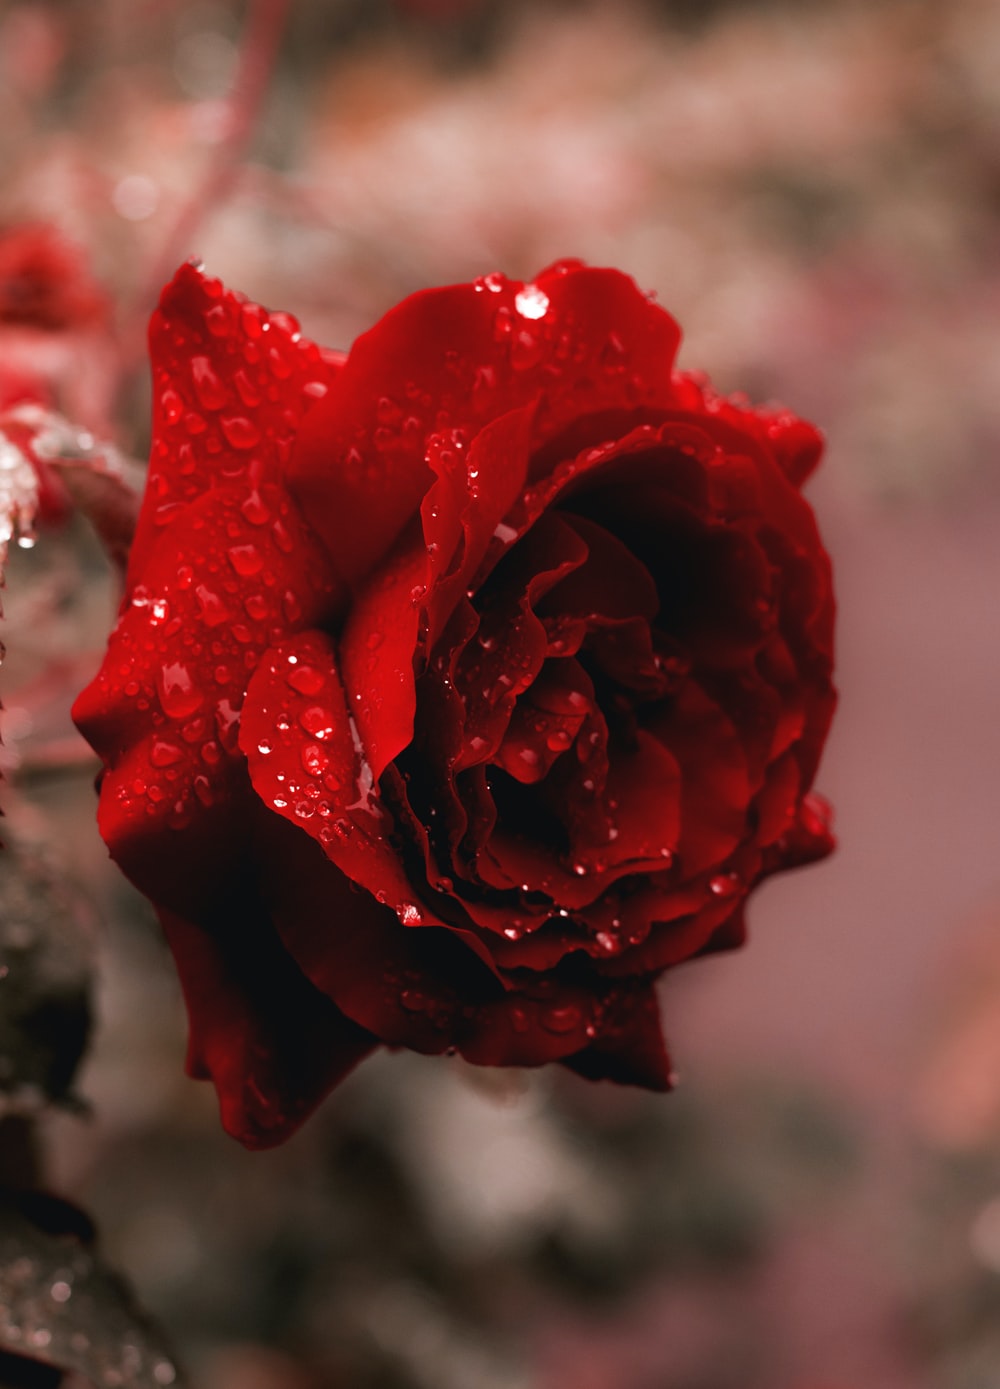 Red Rose Flower Wallpapers